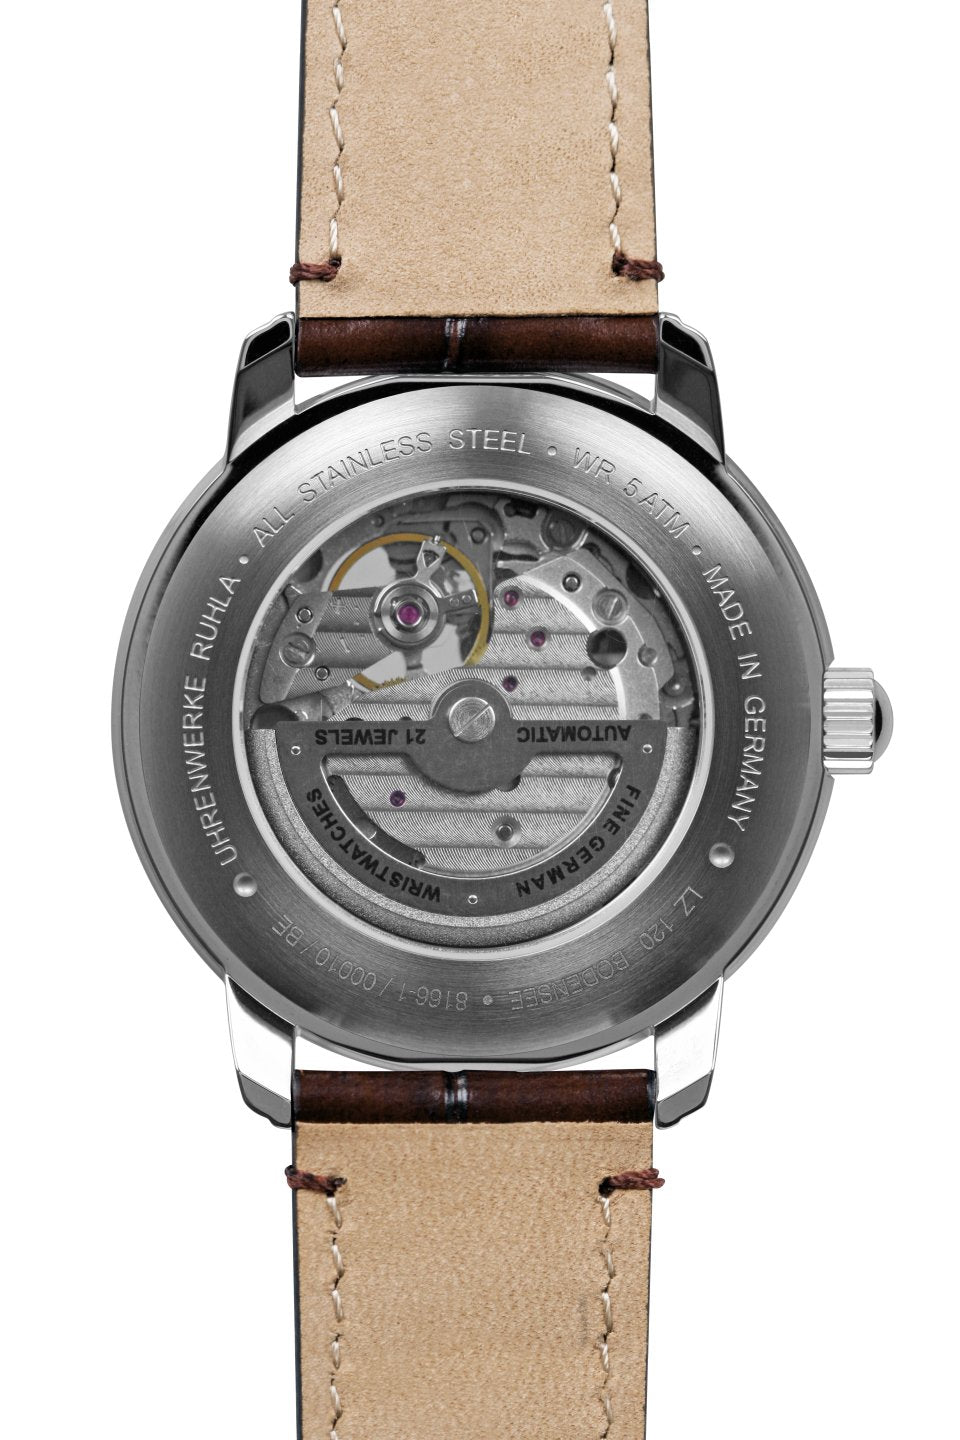 Zeppelin 8166-1 Automatic open heart watch with beige dial and brown leather strap made in Germany 